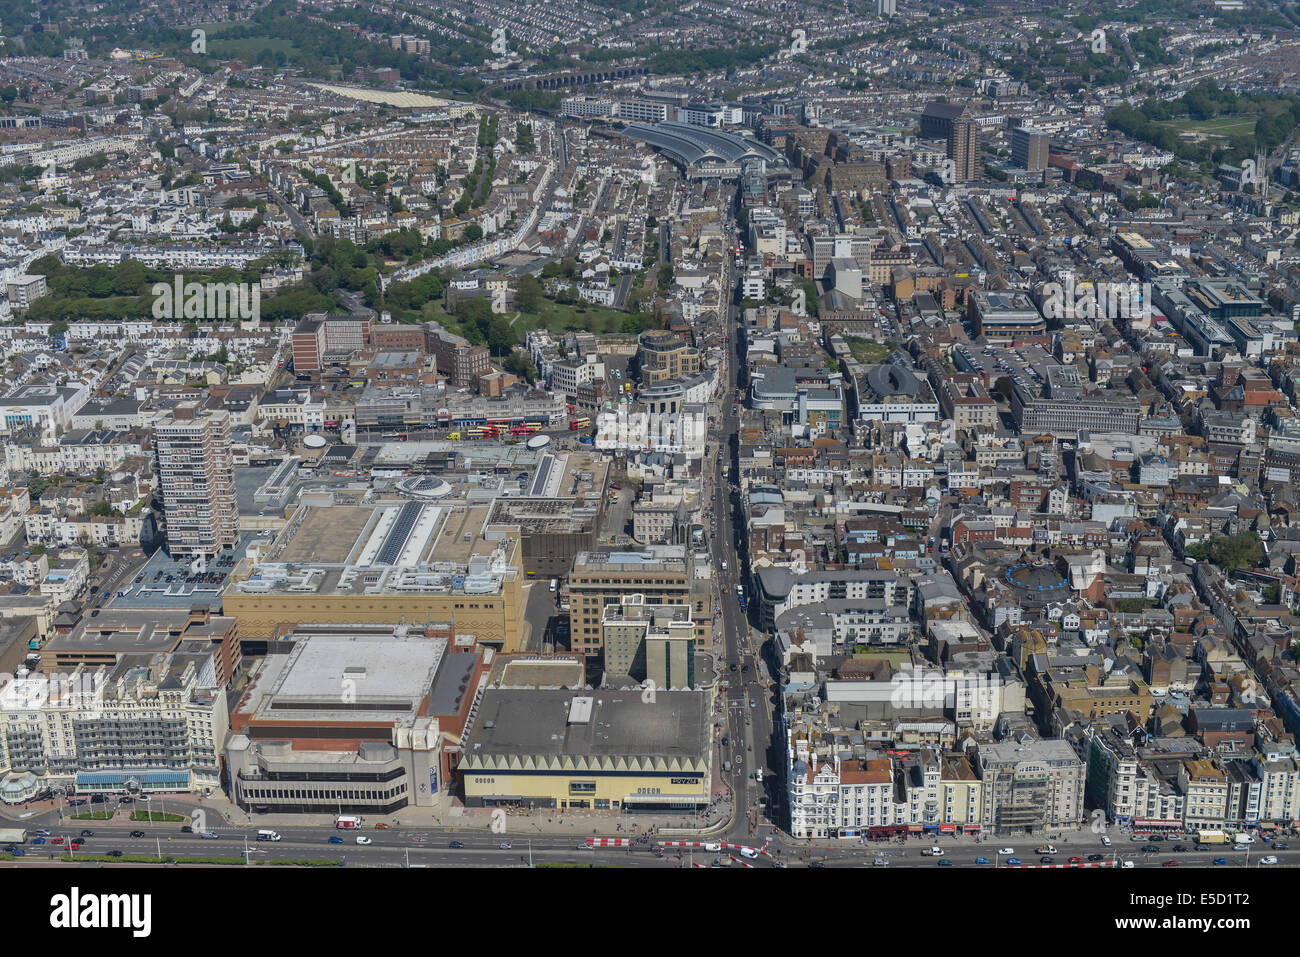 An aerial view of Brighton City centre with the railway station visible. Stock Photo